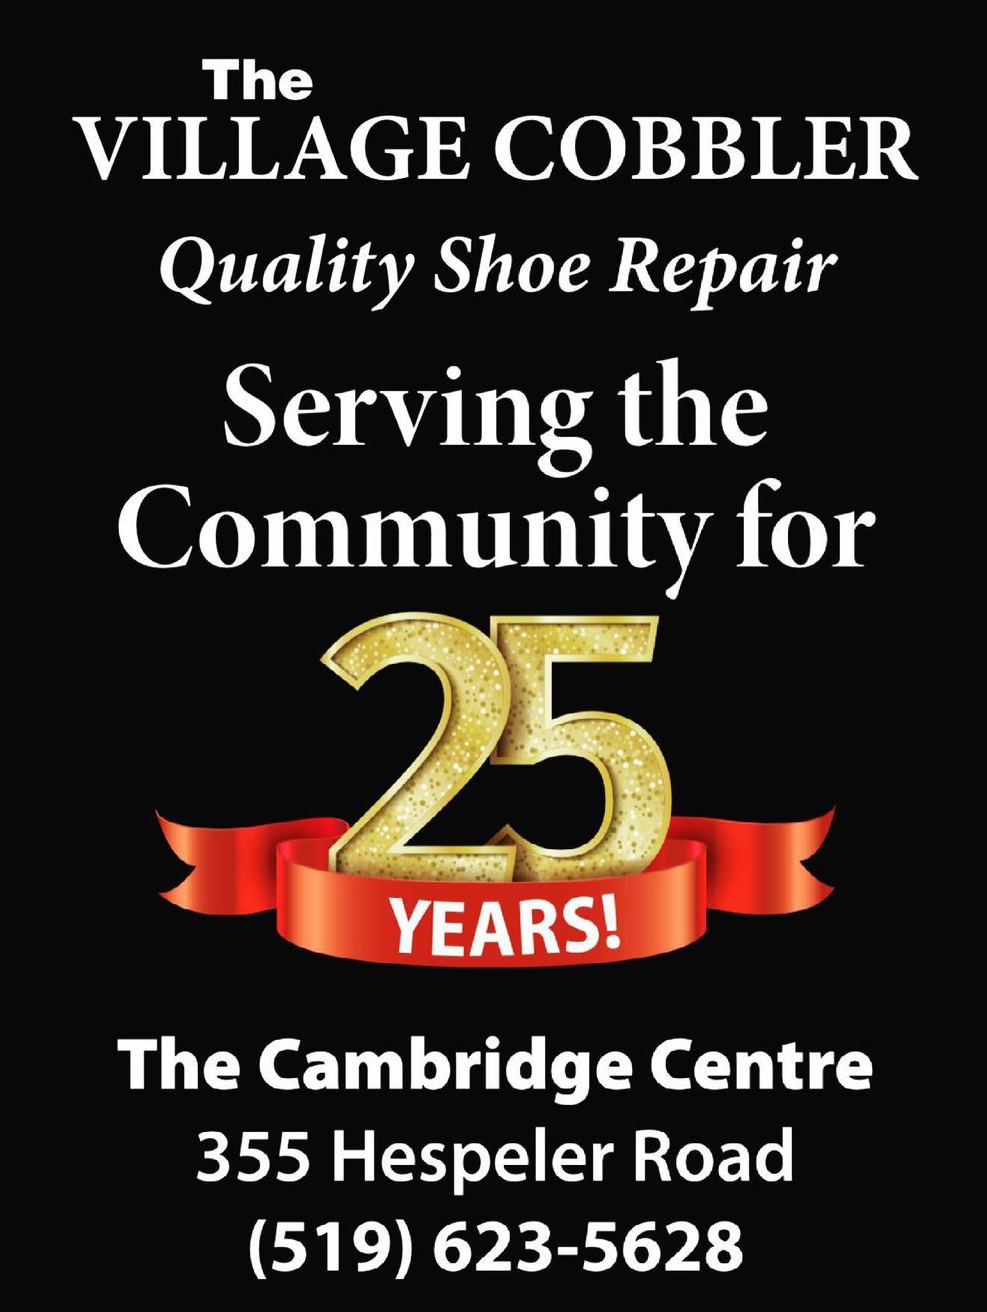 Infographic to let visitors know the village cobbler is celebrating 25 years of serving the cambridge, kitchener-waterloo community